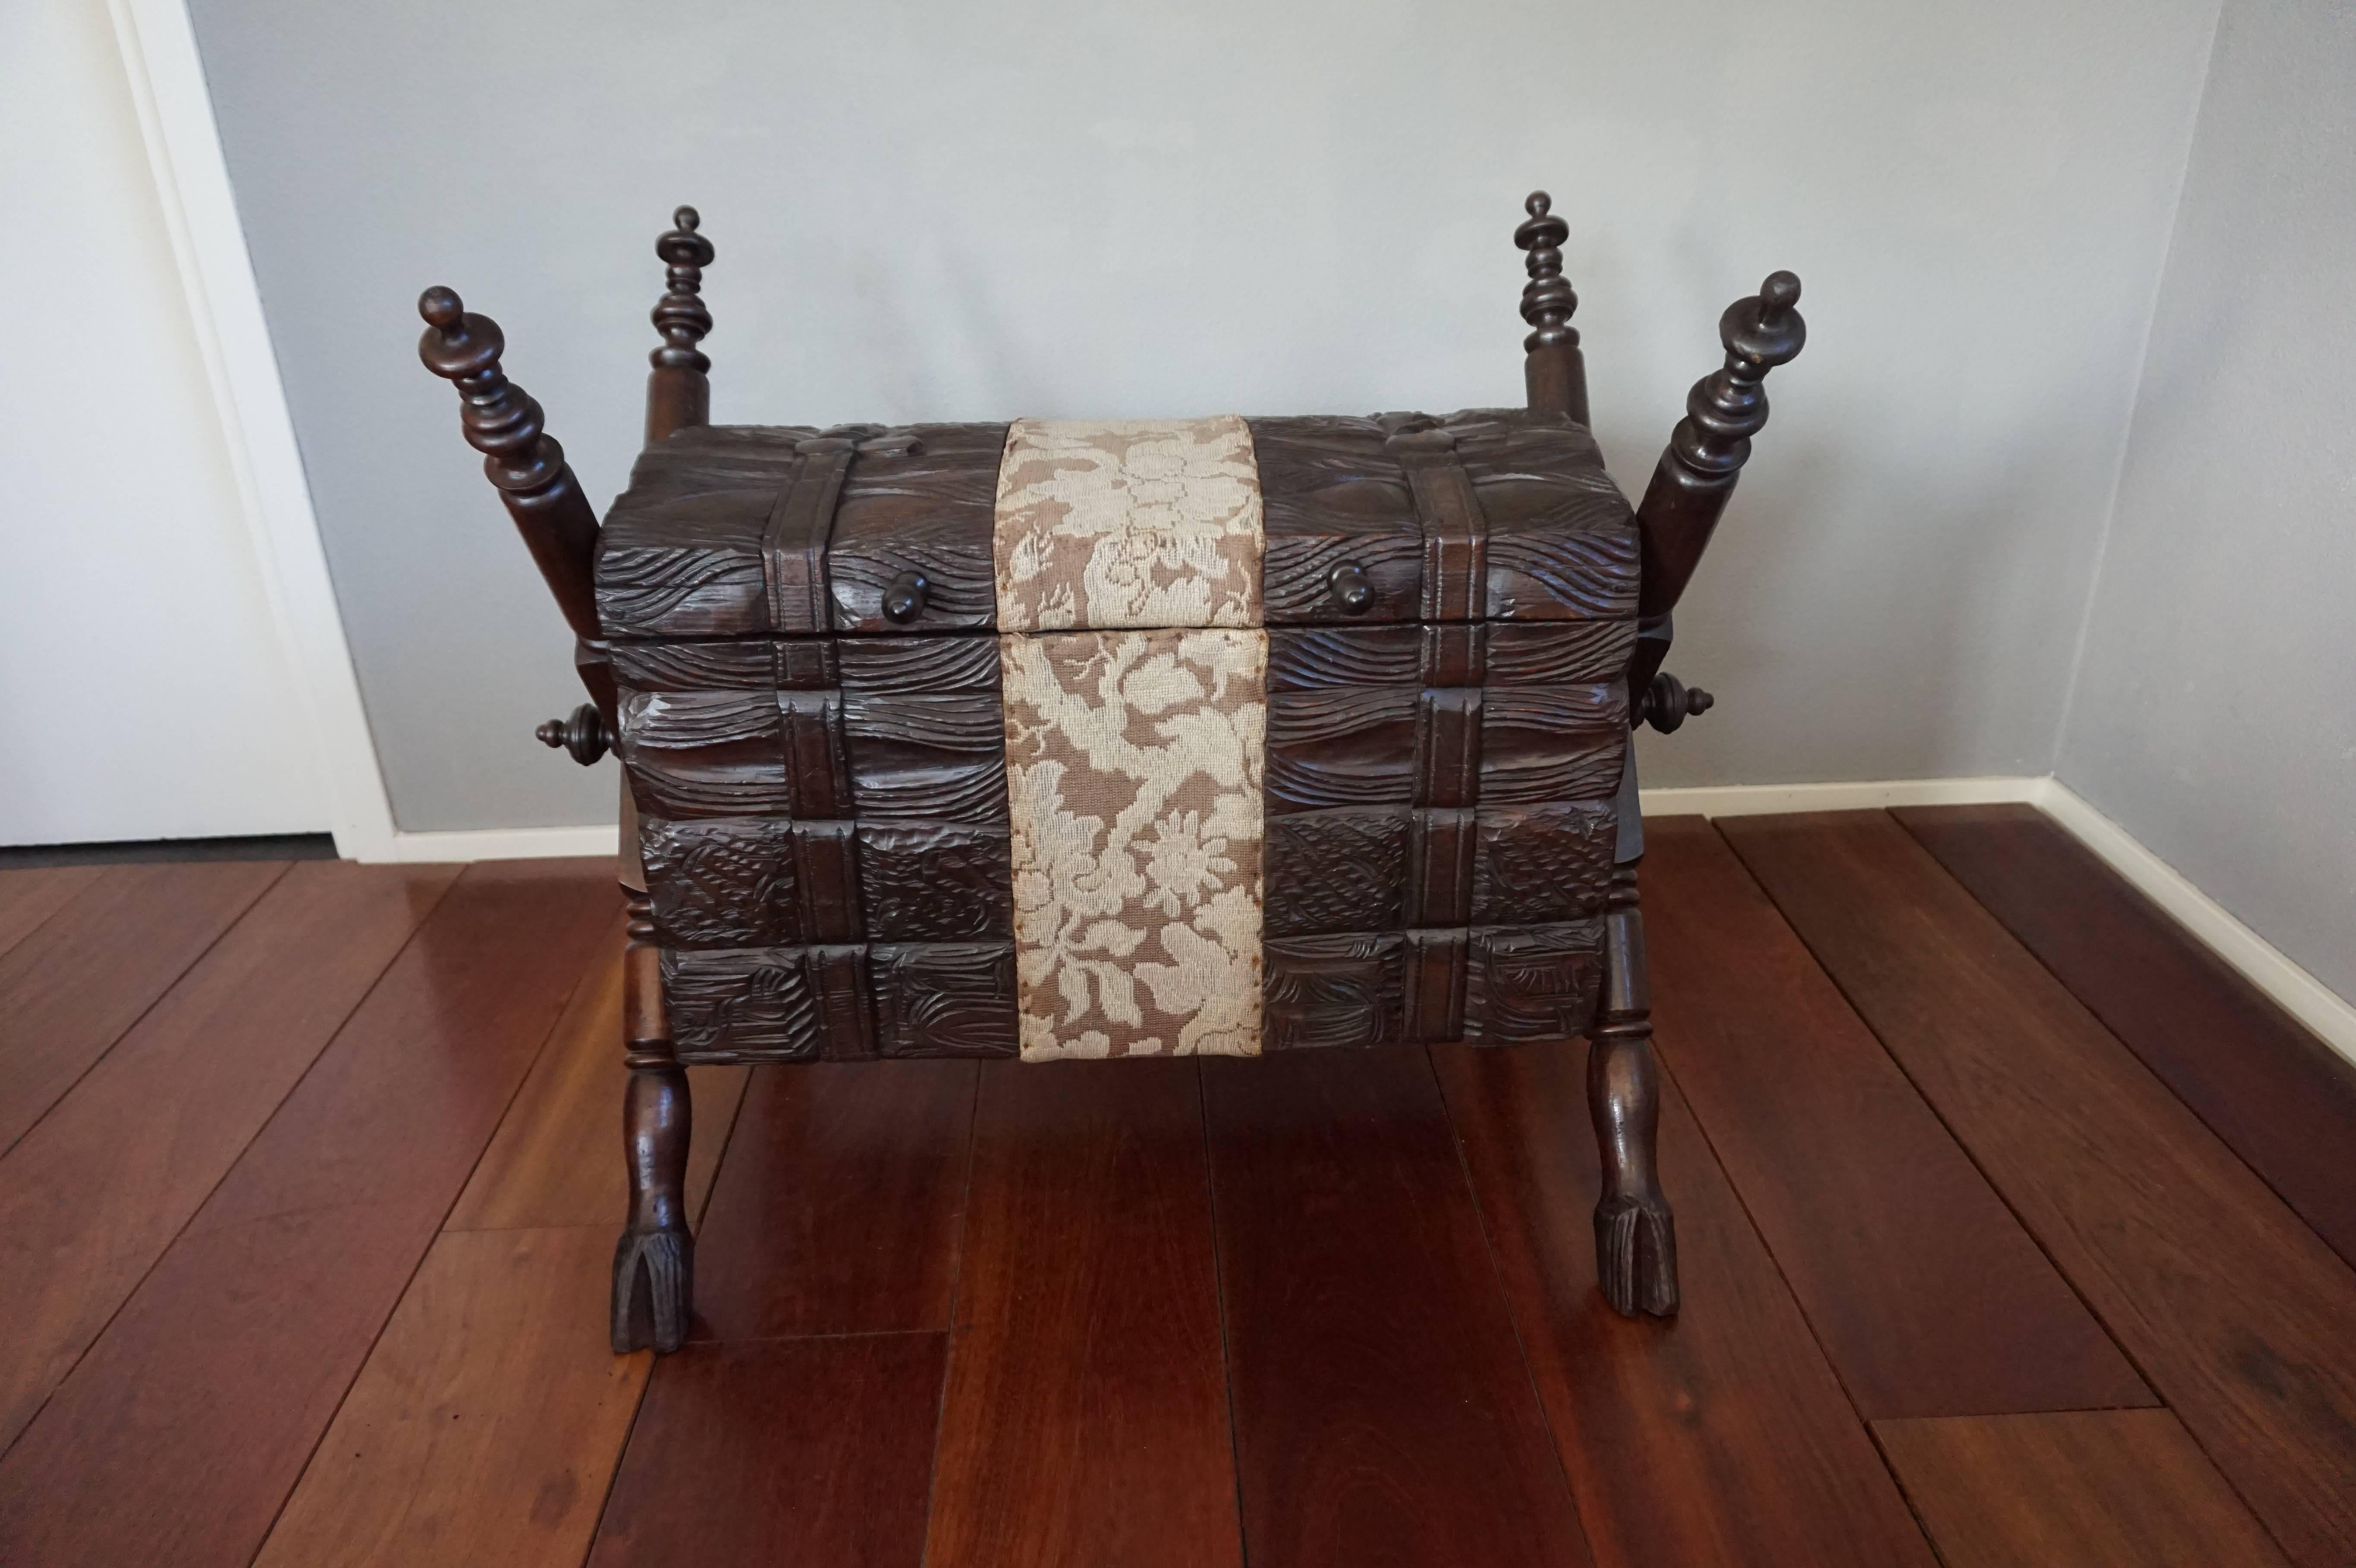 Larger than average and beautiful trunk.

It is not often that you find antiques of this age and beauty in such remarkable condition. You would think that in the course of a 125+ years life, at least one of the crossed legs with the goat hoofs would